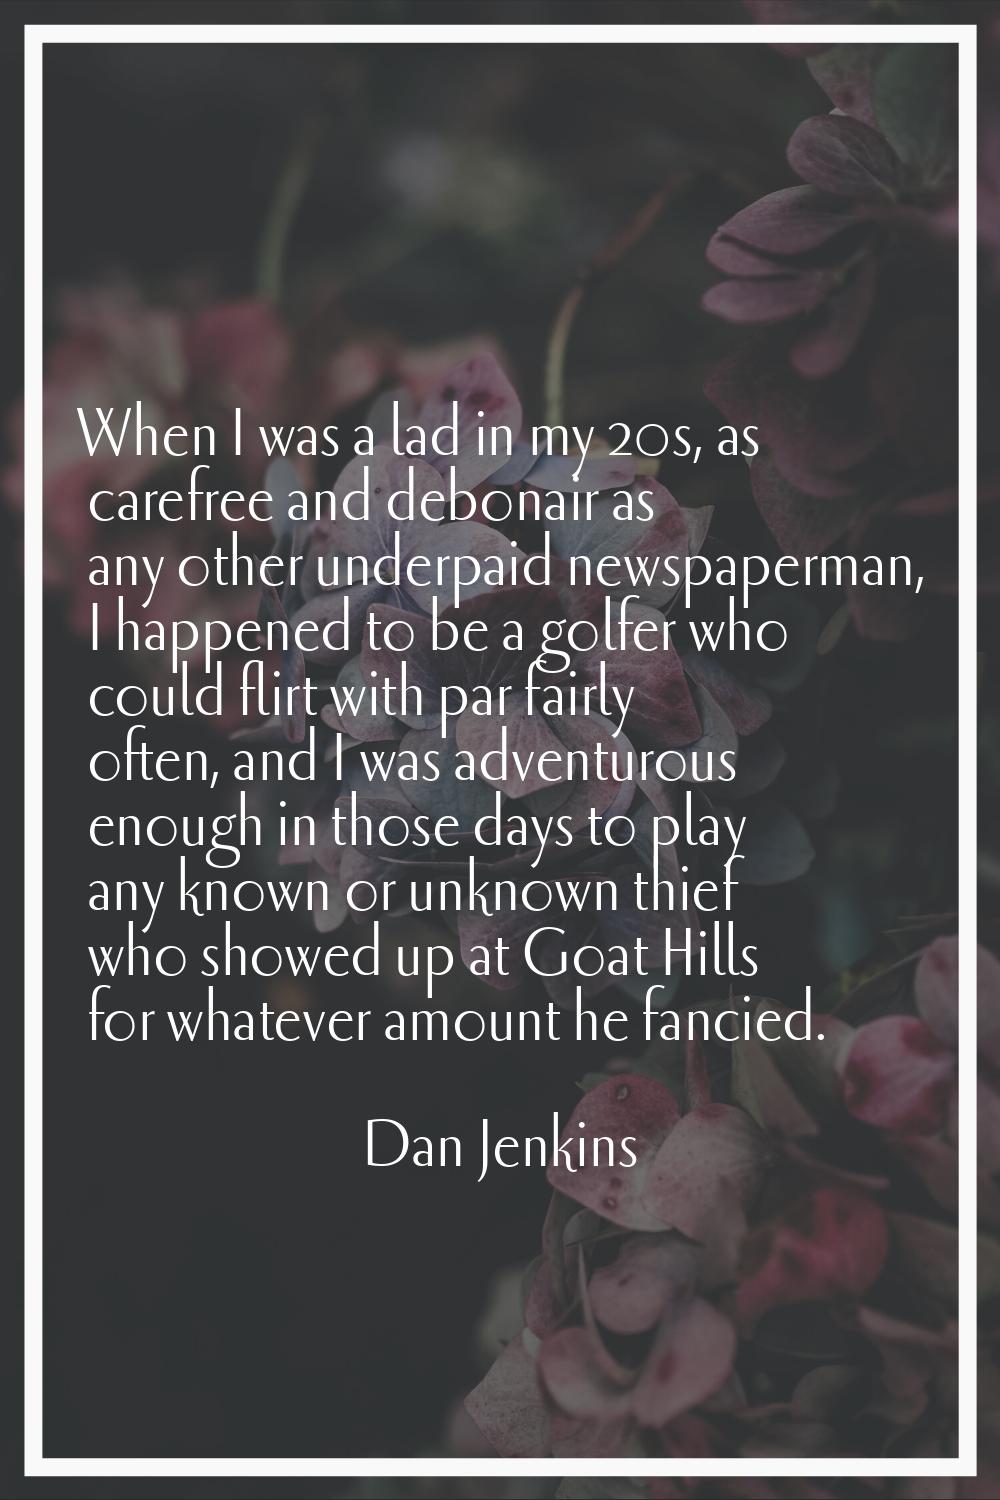 When I was a lad in my 20s, as carefree and debonair as any other underpaid newspaperman, I happene